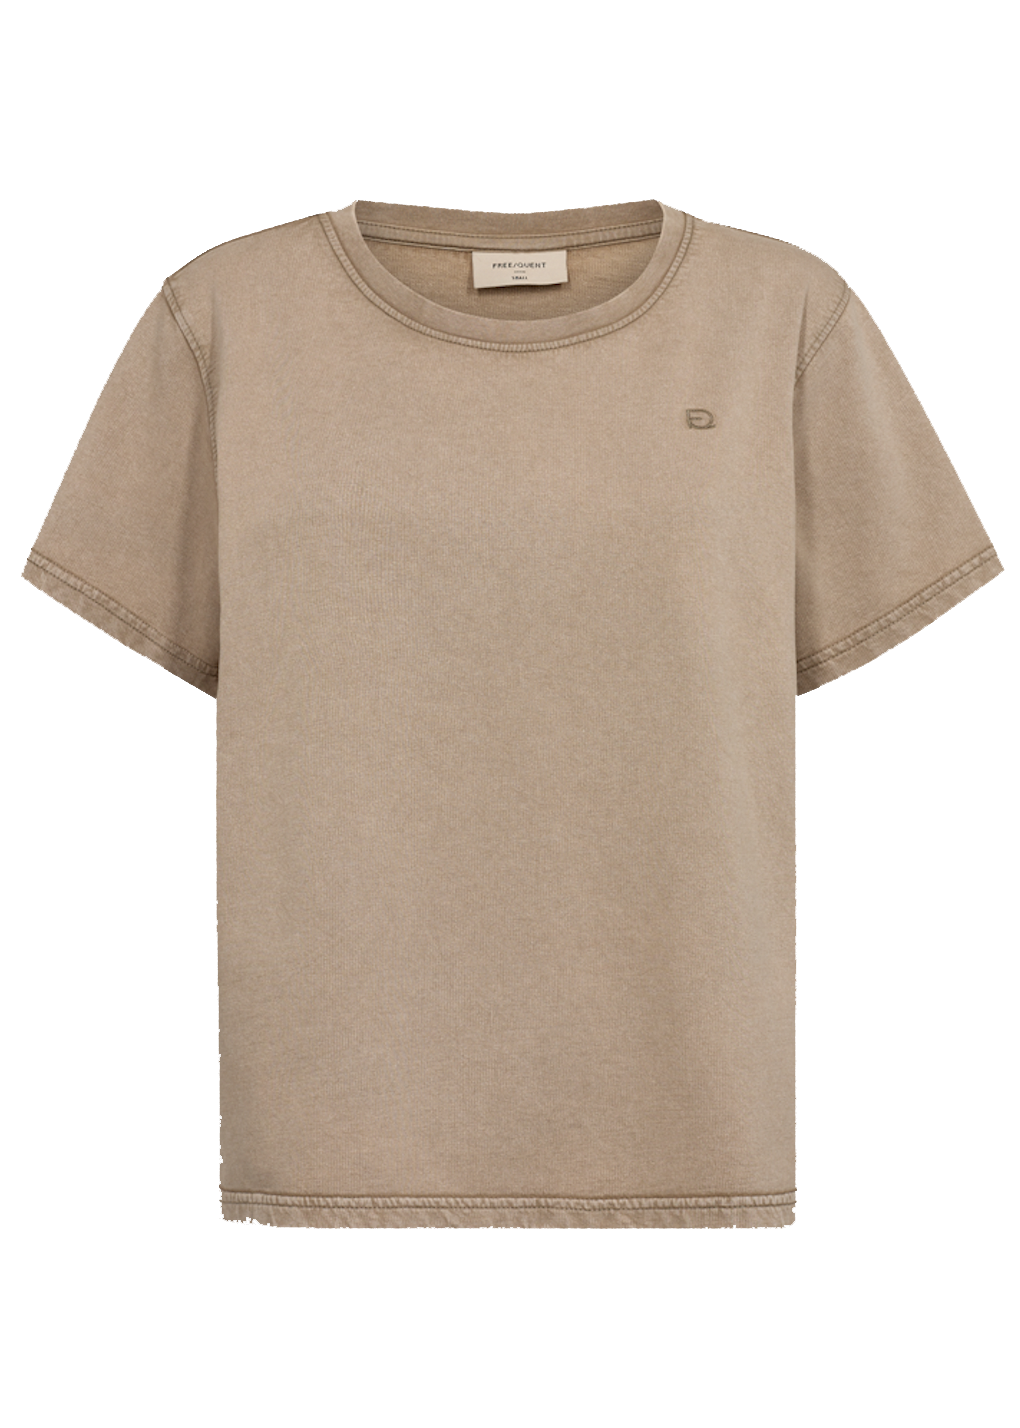 Sweatshirt Kurzarm Blest, Simply Taupe Freequent